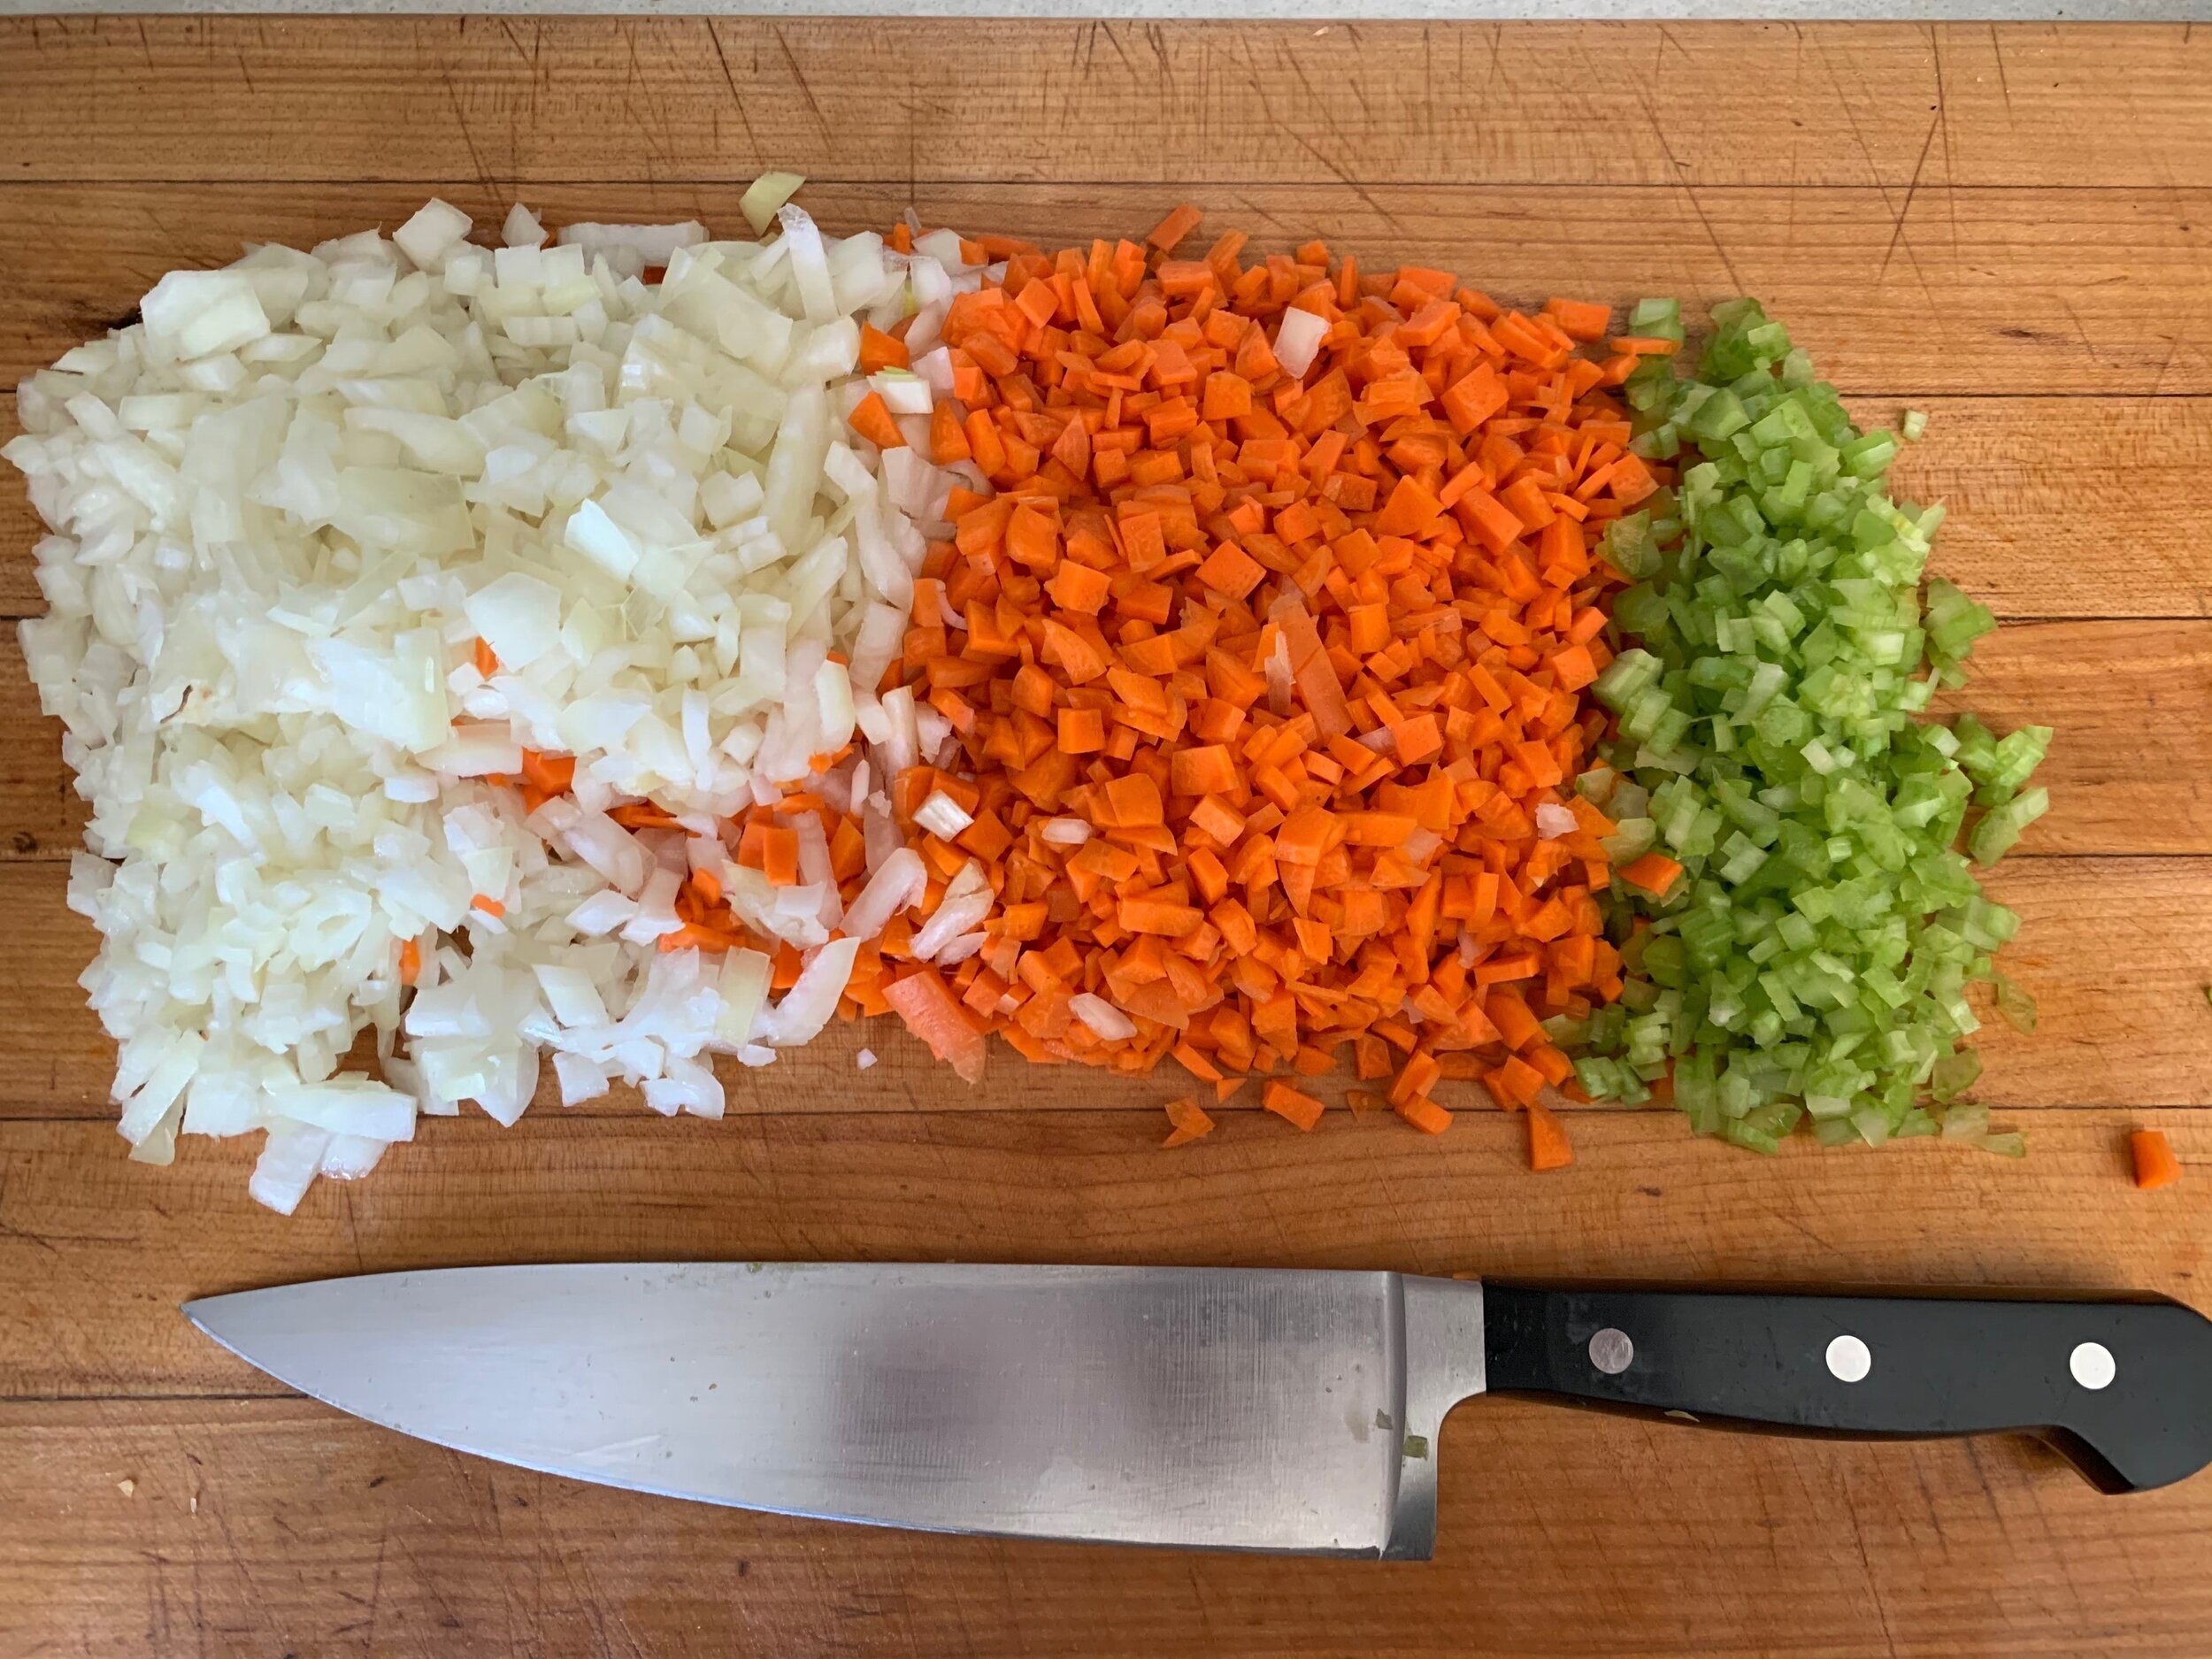 Soffritto - a mix of diced onions, carrots, and celery